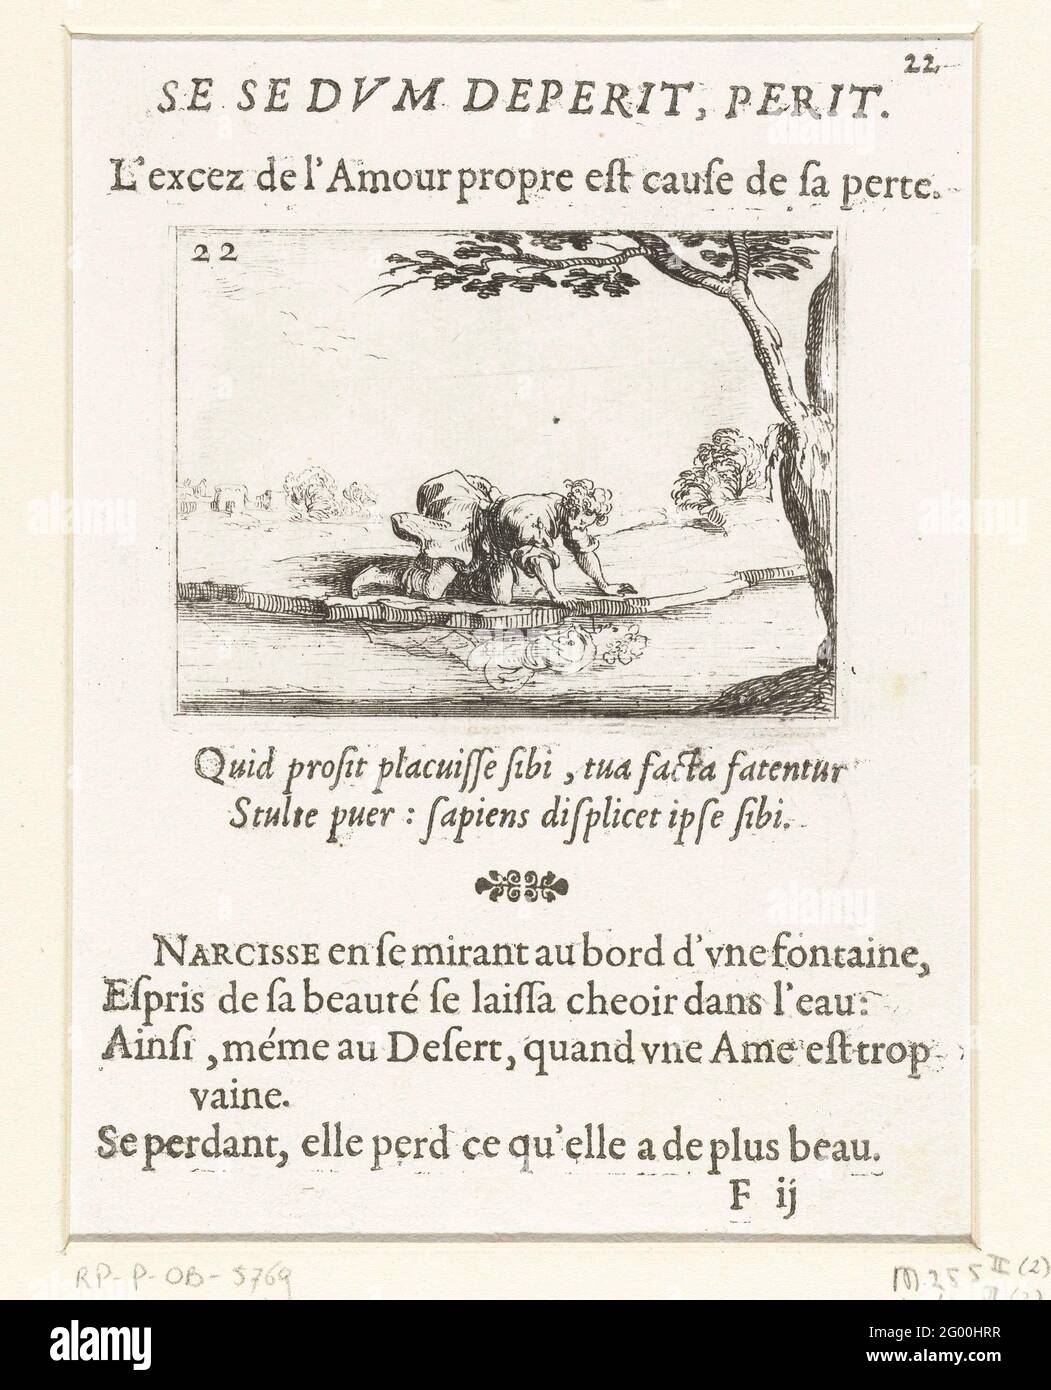 Narcissus admires his mirror image in the water; Sese Dum Deperit, Perit / L'Excez de l'Amour Propre Est Cause de SA Perte; Monastery life in emblems. Presentation of a young man (Narcissus) looking at his own mirror image at a waterfront. Above and below this print Latin and French texts in letterpress. This magazine is part of the emblem series 'monastic life in emblems'. In addition to an illustrated title page and 26 emblems, the second state of this series contains a title page and a blade with assignment, both in letterpress without image. Stock Photo